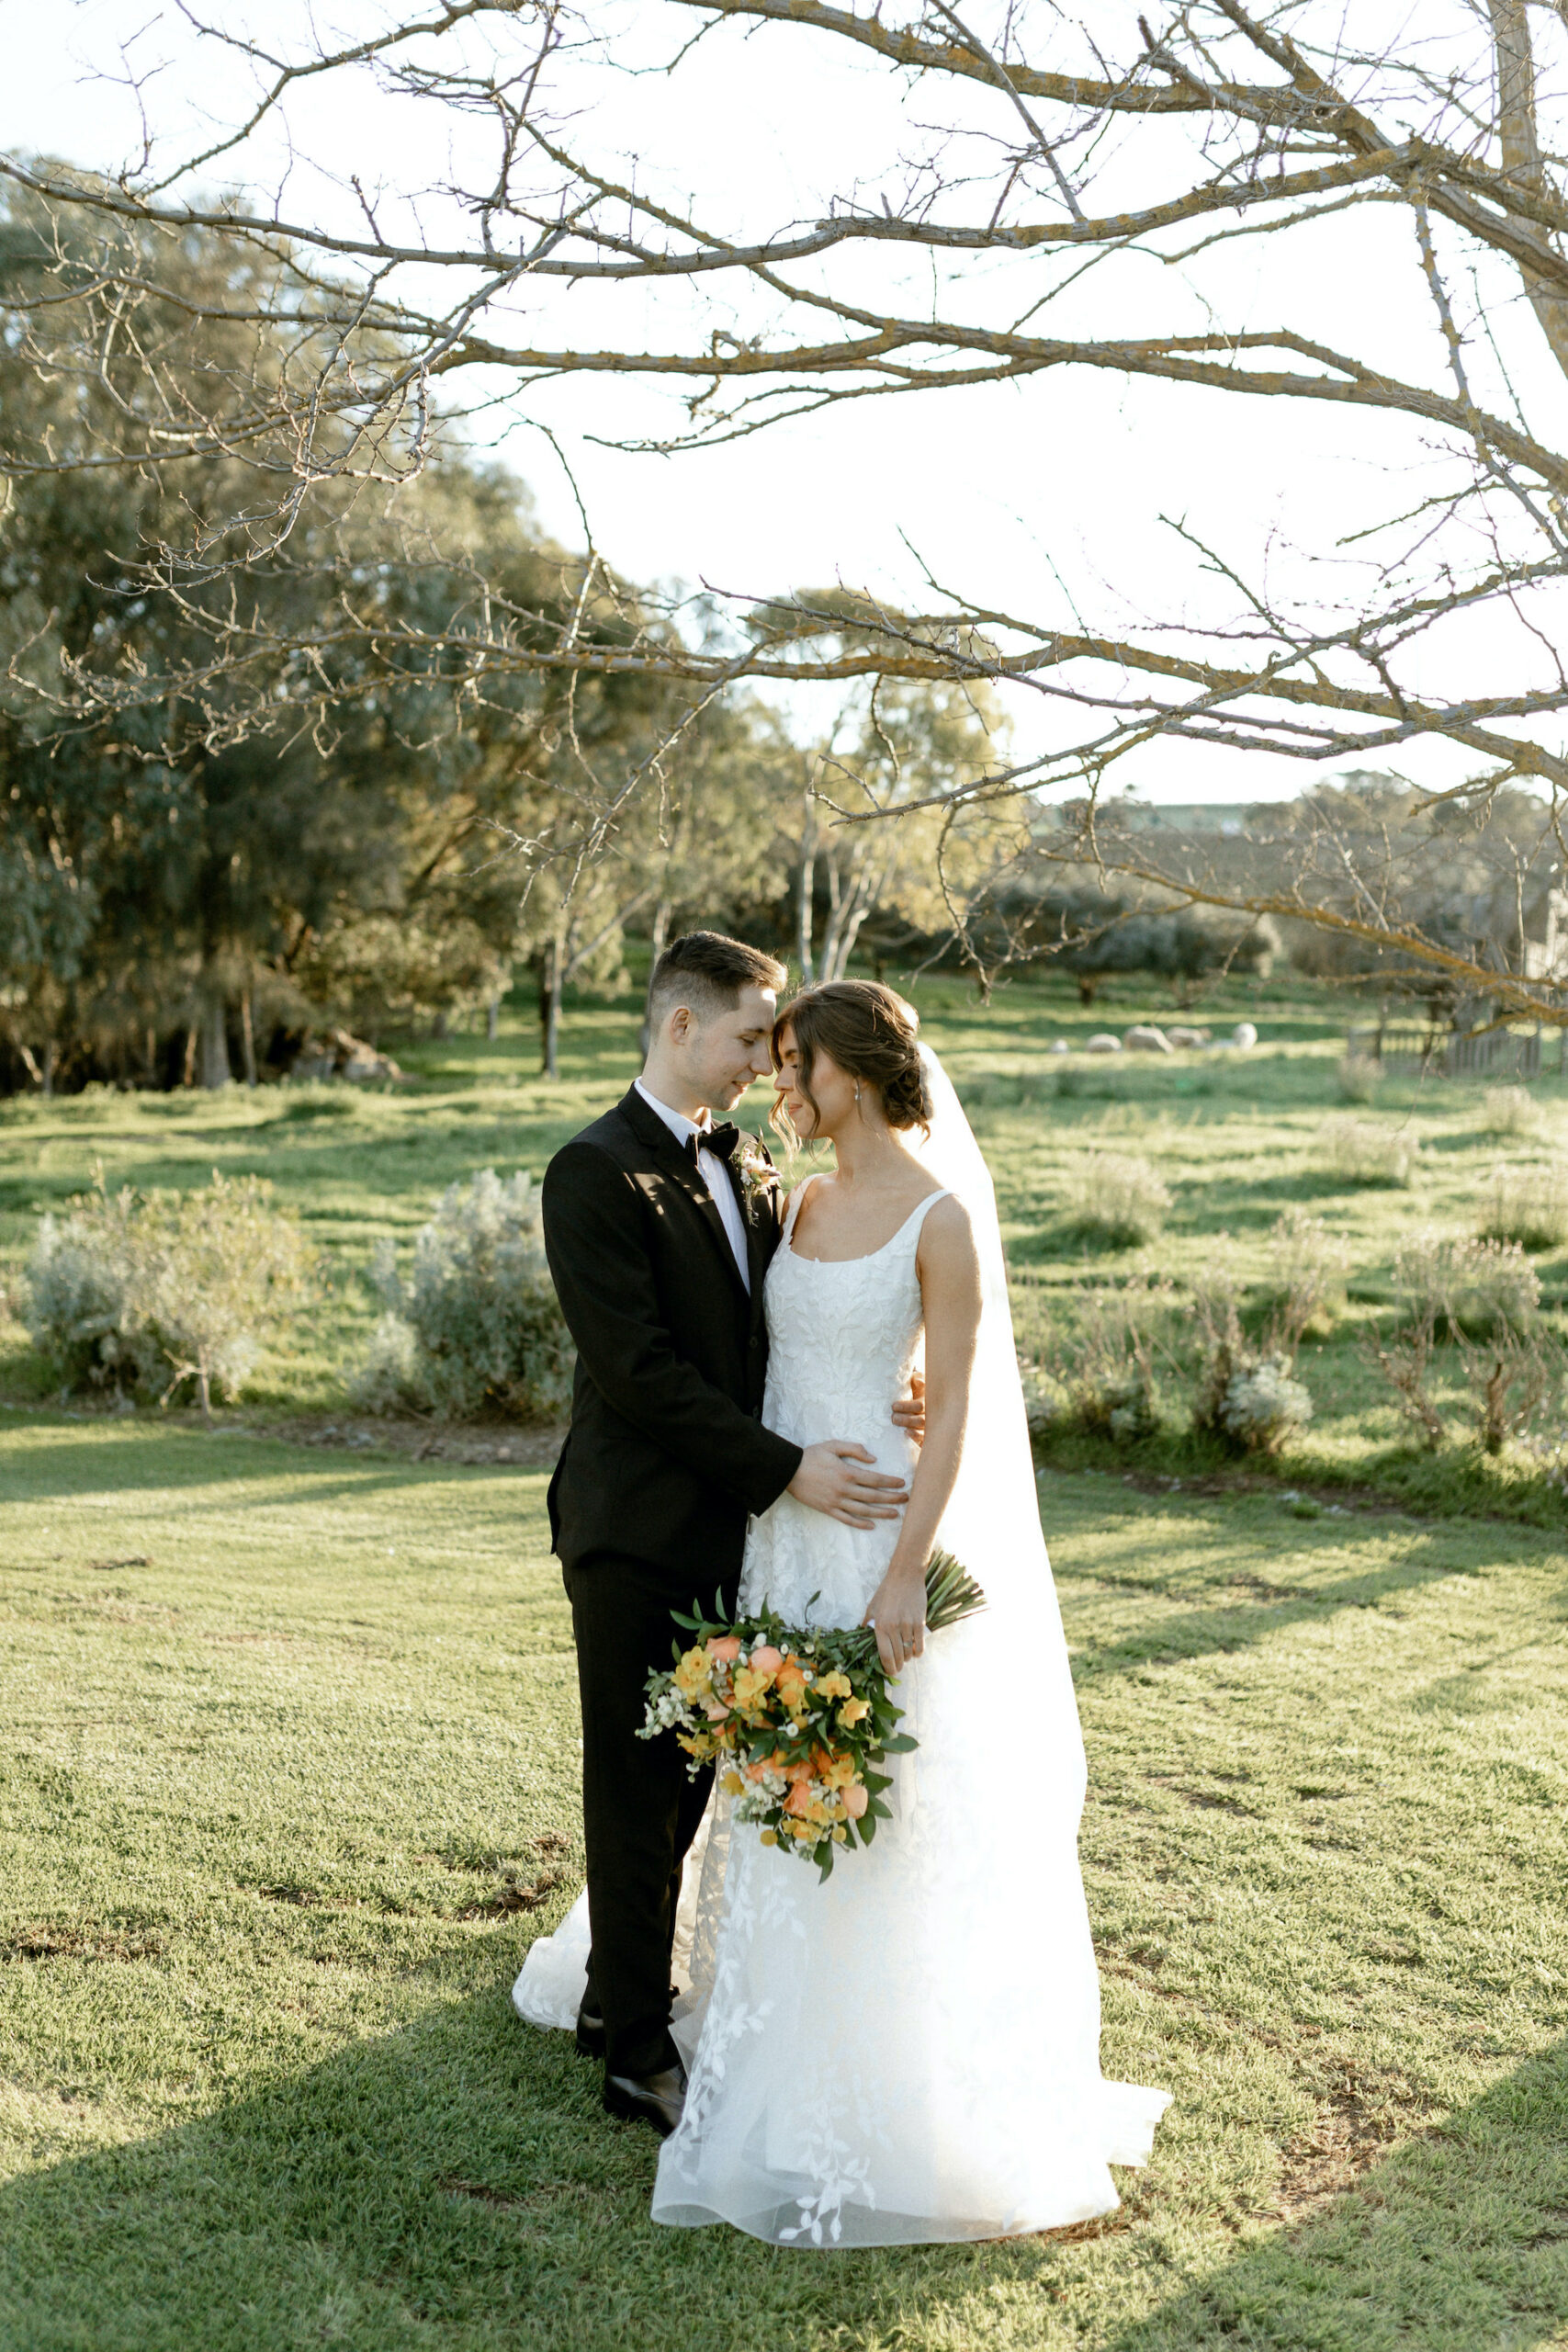 White Hill Estate Oliver's McLaren Vale Homestead Wedding Ceremony, Reception, Accommodation, Rustic Barn, Dry Hire Property